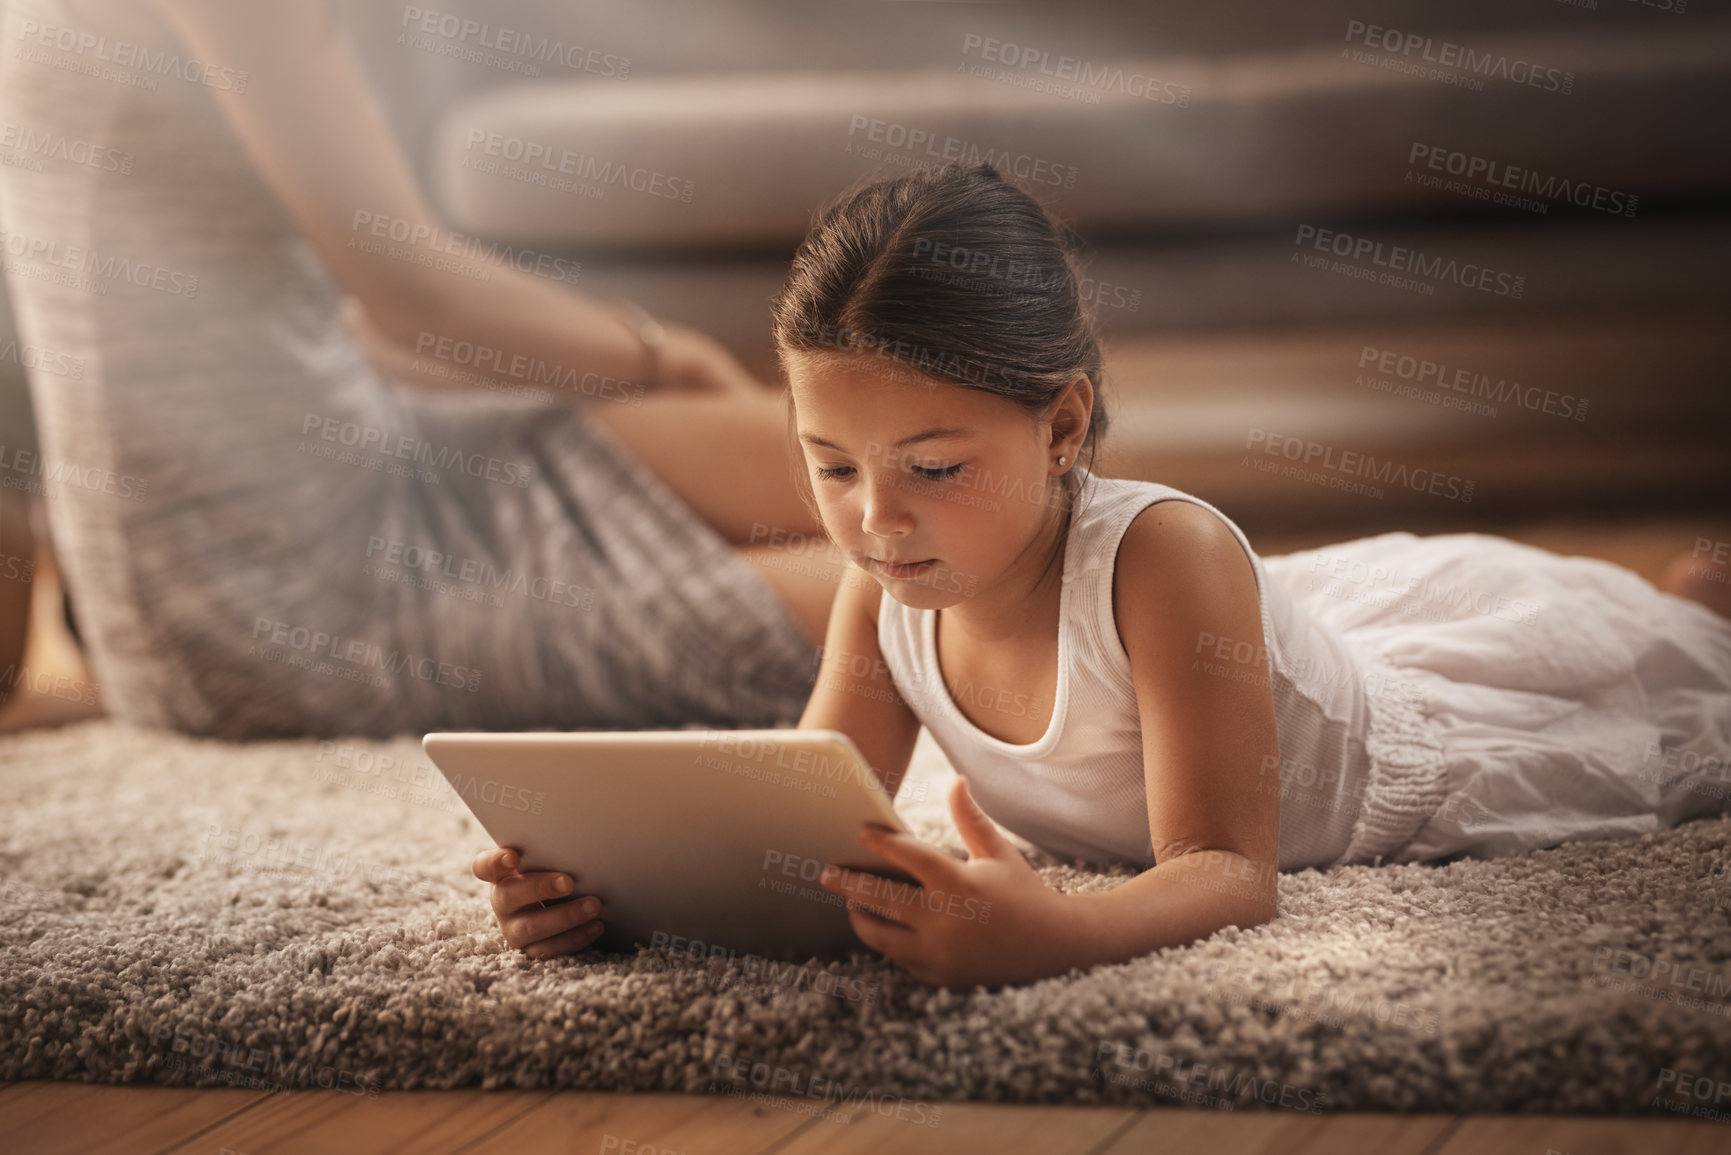 Buy stock photo Shot of an adorable little girl using a digital tablet on the floor at home with her mother in the background